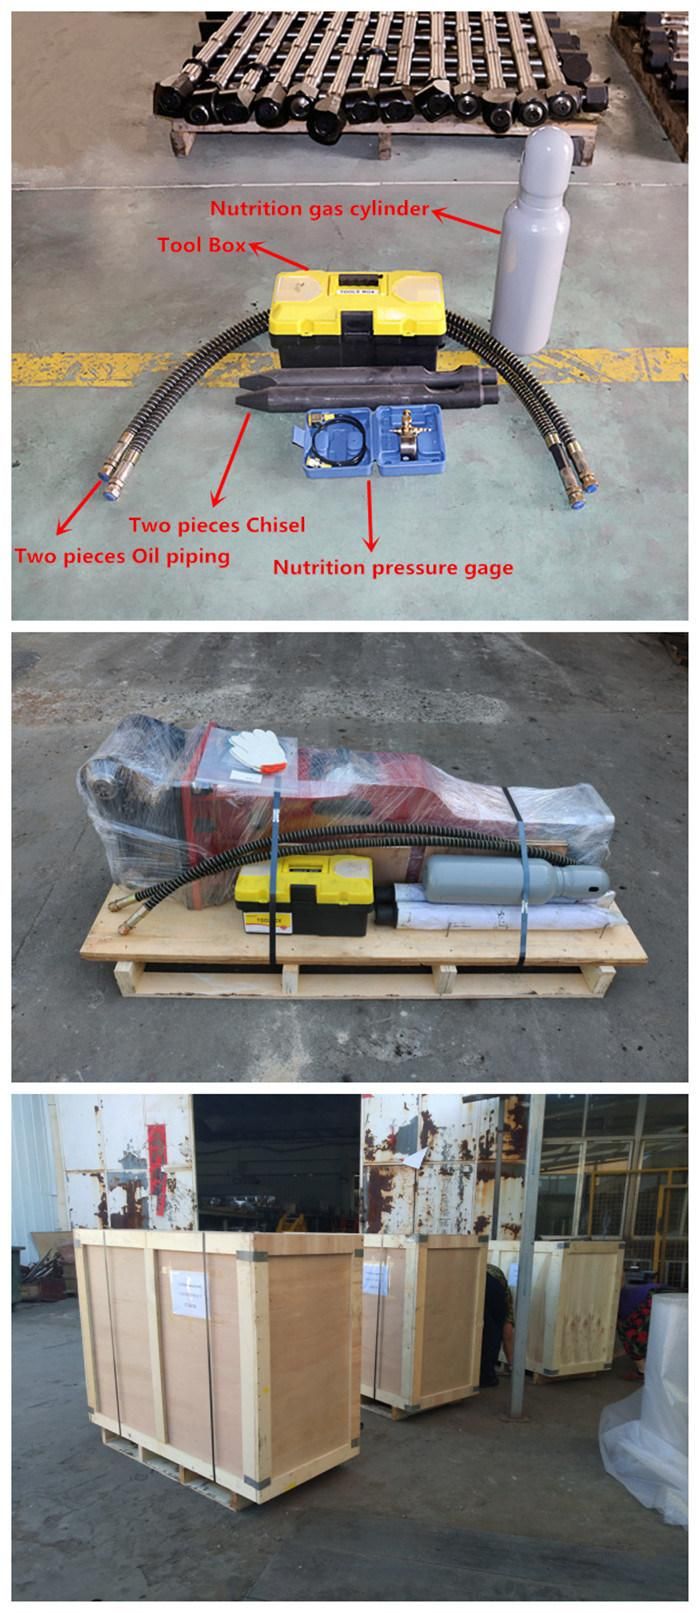 Factory Price Concrete Vibrating Plate Hydraulic Compactor